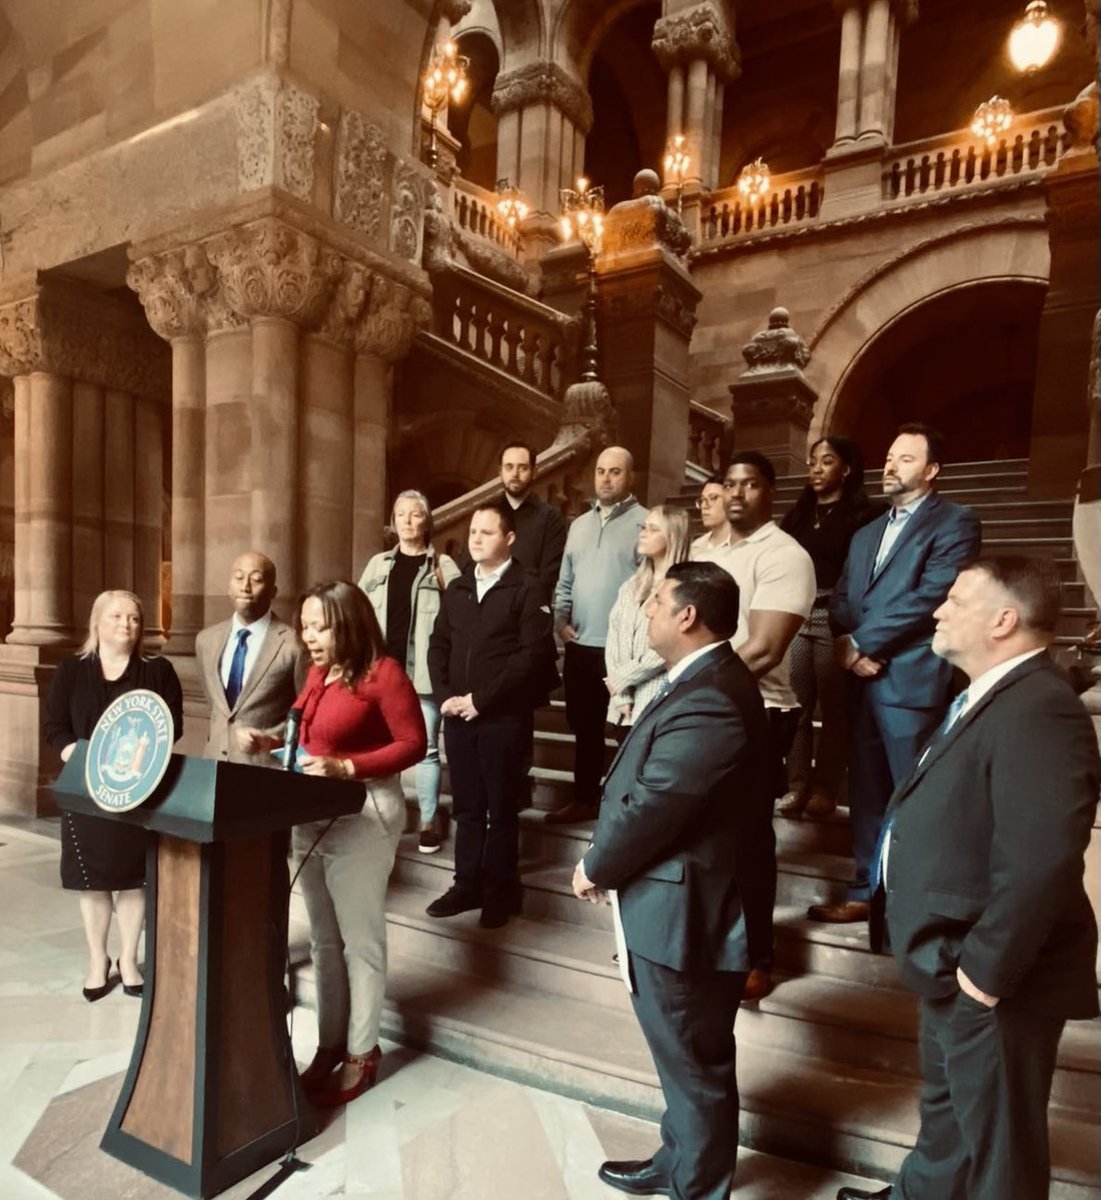 Bitcoiners and politicians come together in Albany, New York to speak out against a proposed ban on proof-of-work mining and to keep industry jobs in the state.